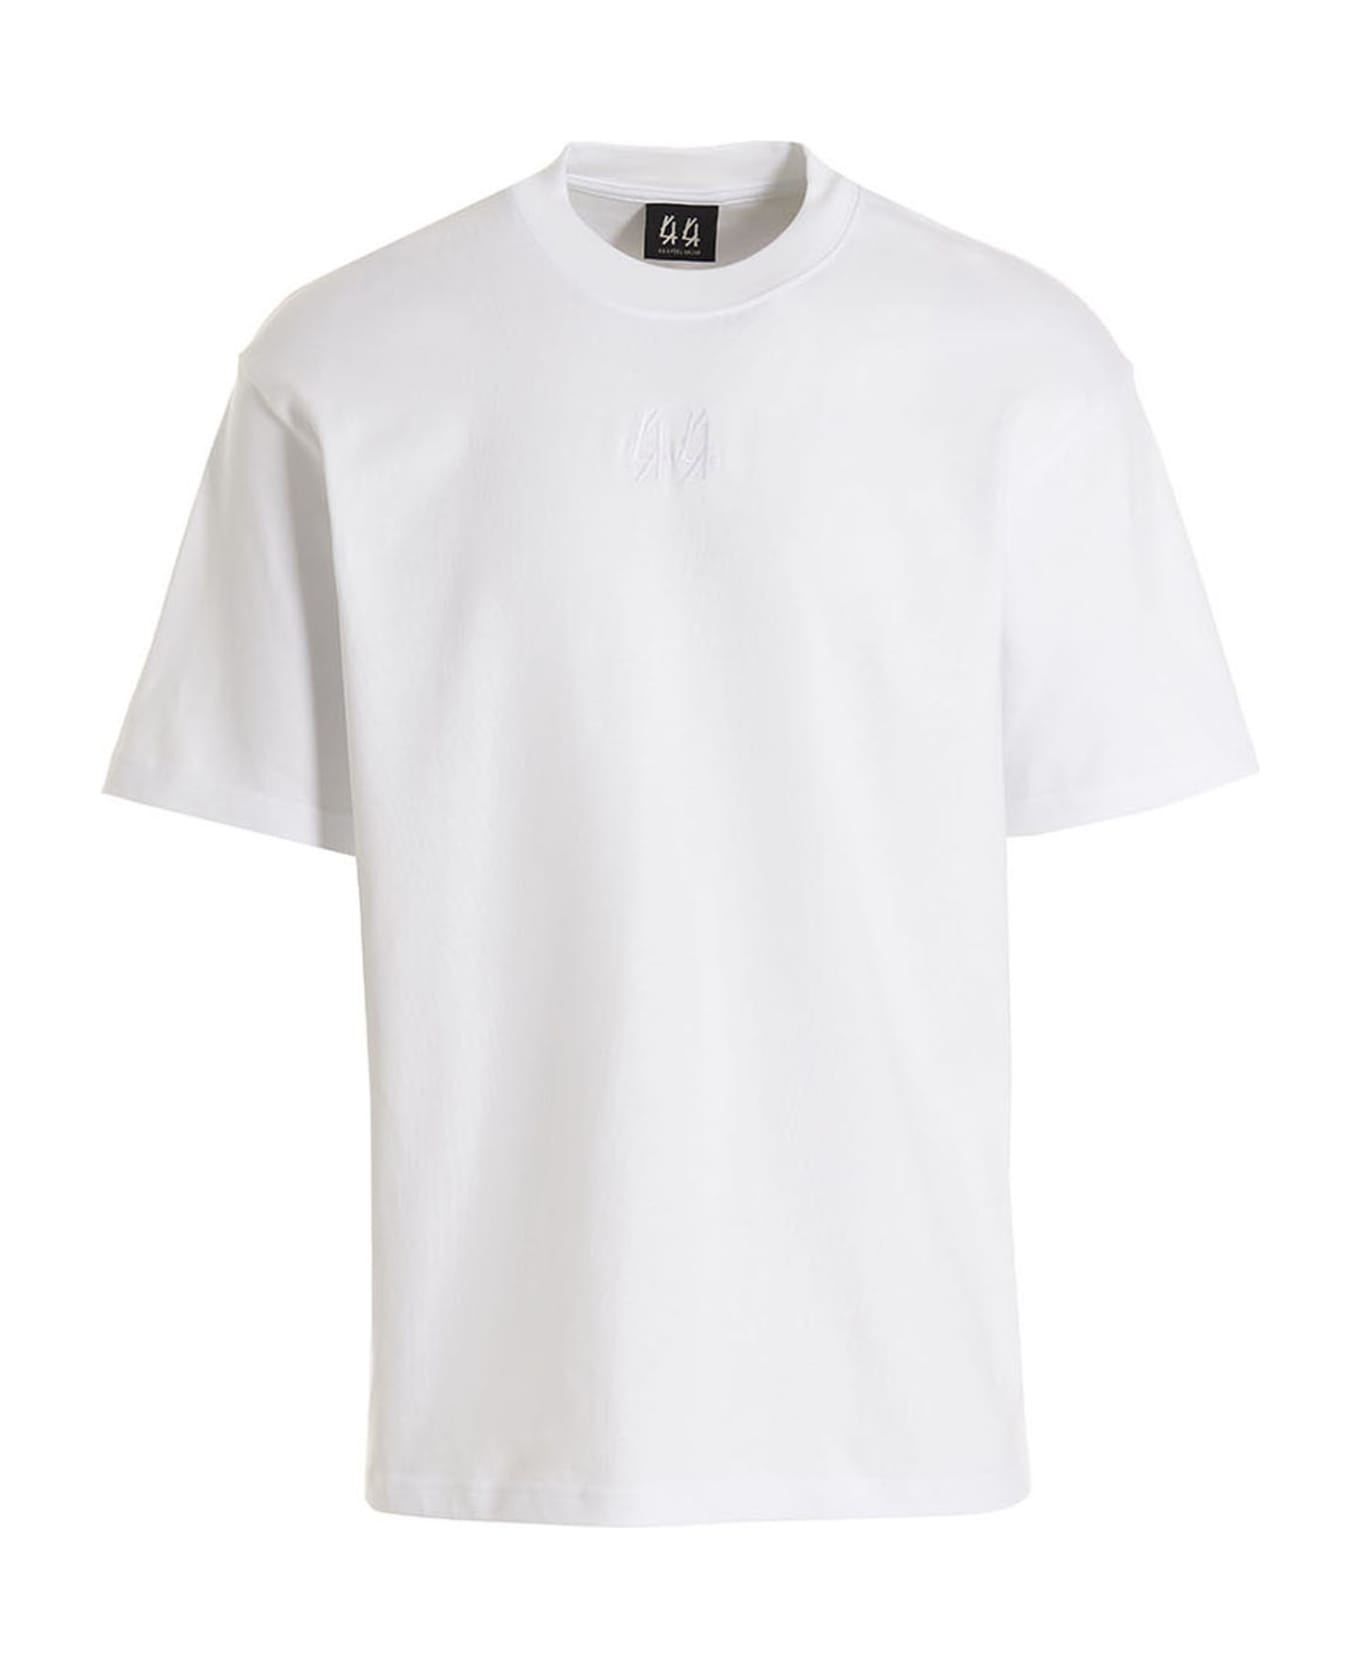 44 Label Group 'scretched' T-shirt - White